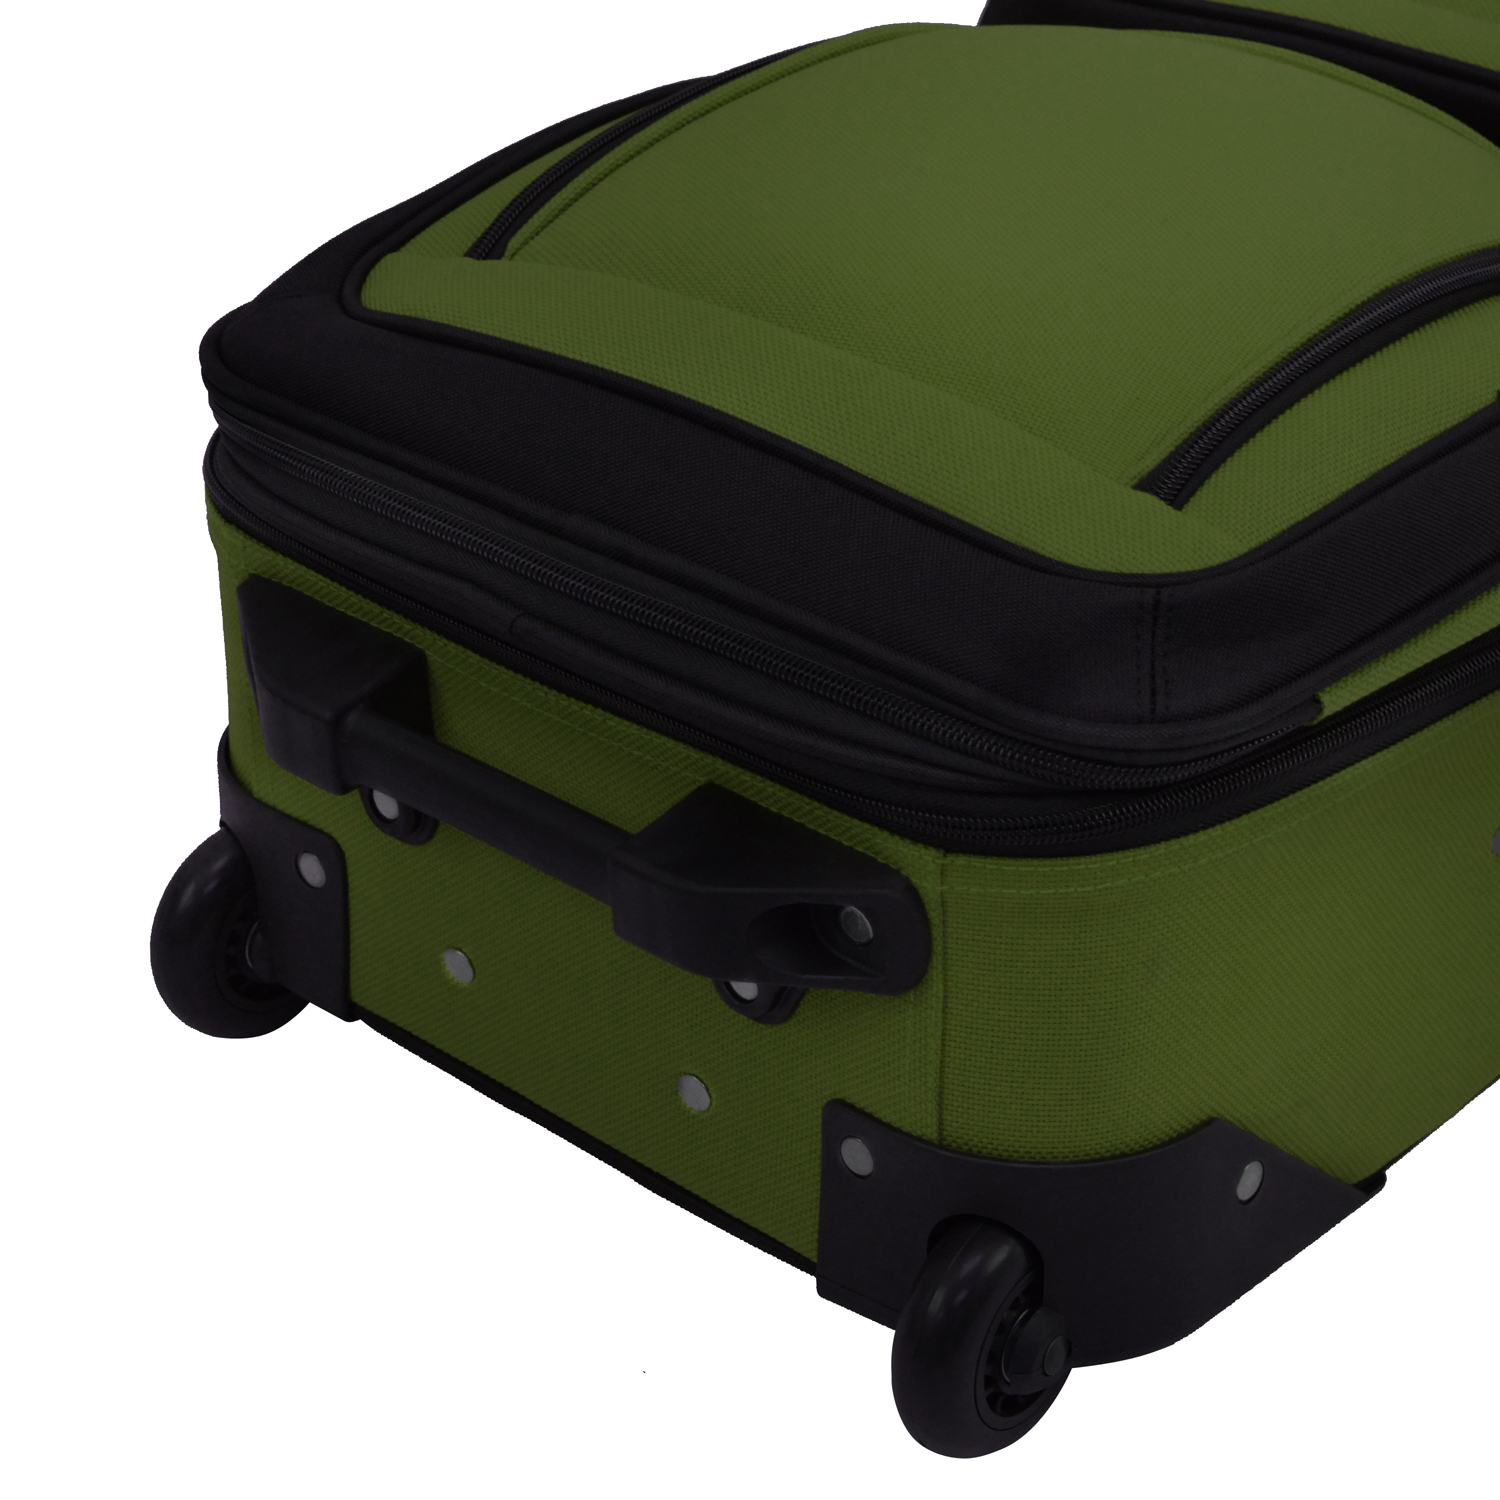 U.S. Traveler Rio Rugged Fabric Expandable Carry-on Luggage, 2 Wheel Rolling Suitcase, Green, 2-Piece - image 6 of 7